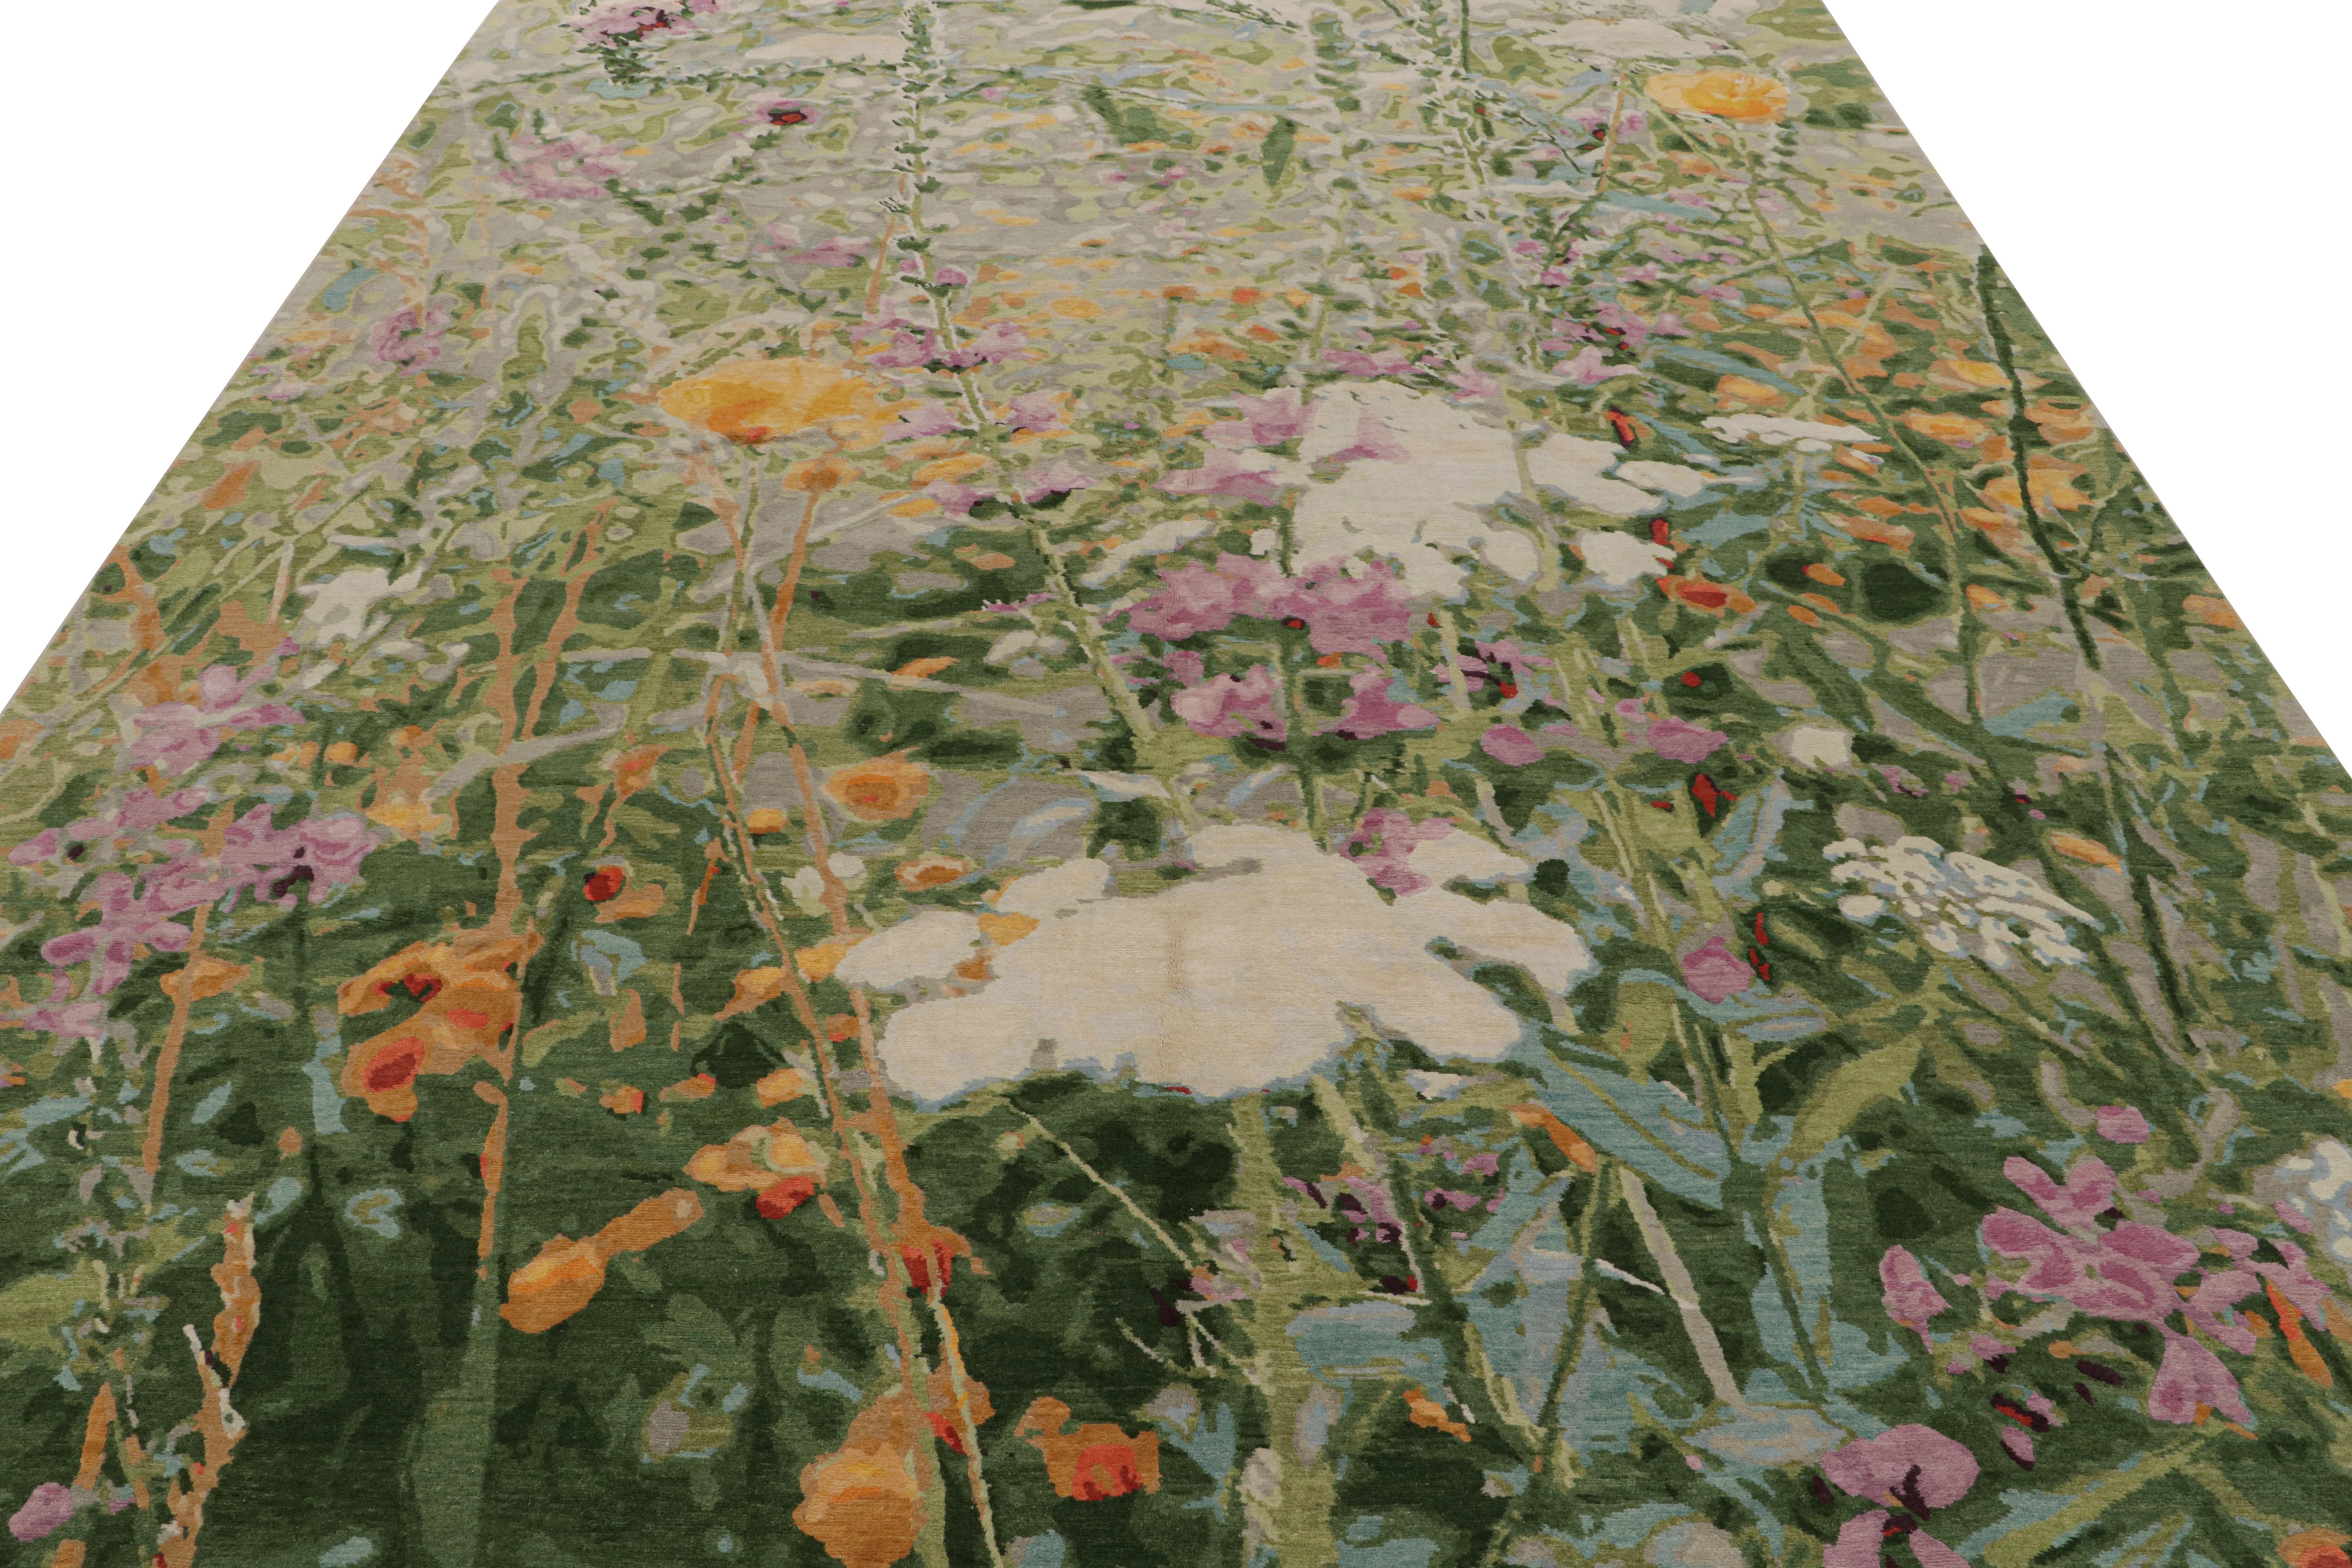 Modern Rug & Kilim’s Abstract Rug in Green with Colorful Patterns “Wild Flowers Spring” For Sale